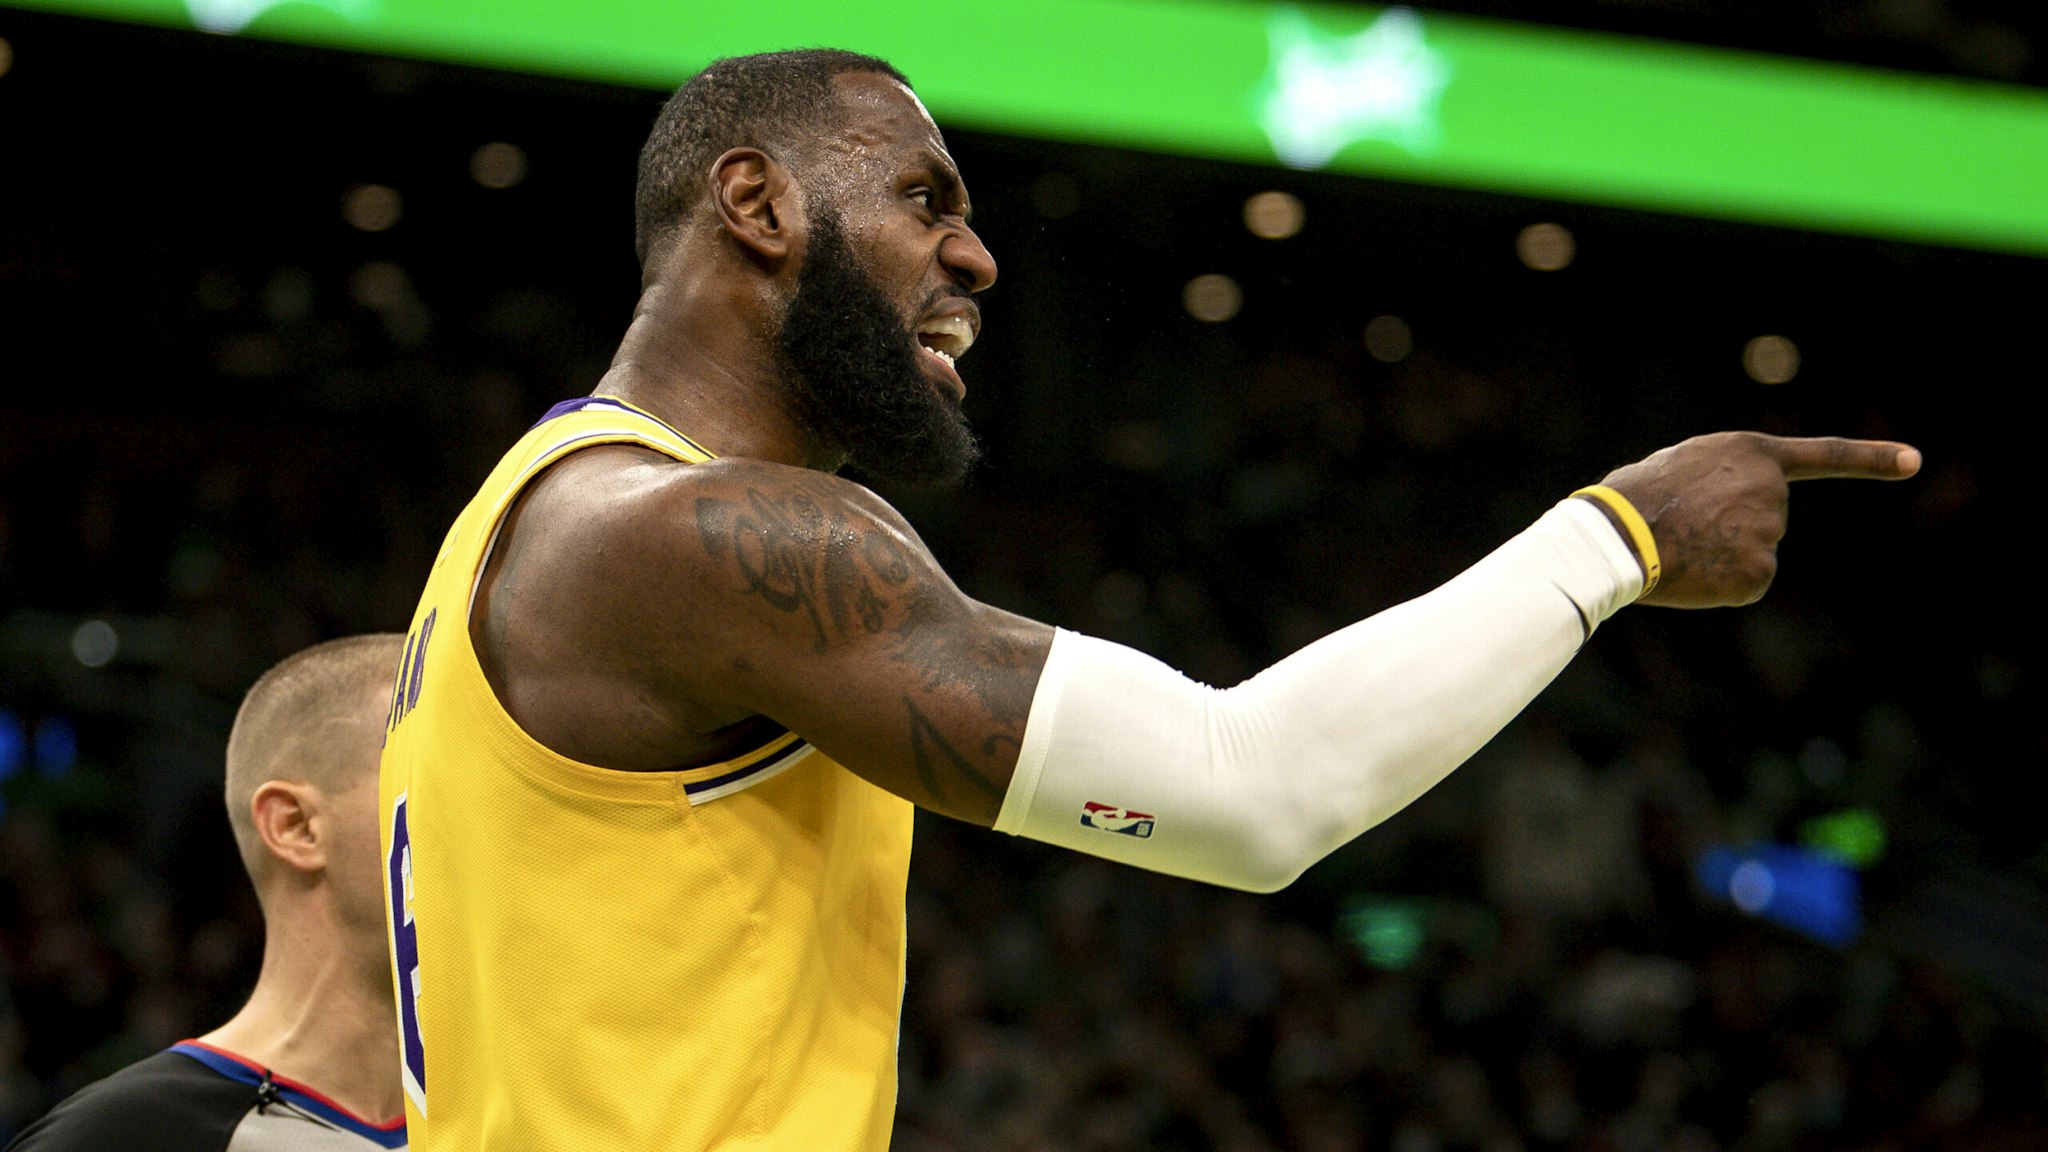 BOSTON, MASSACHUSETTS - NOVEMBER 19: LeBron James #6 of the Los Angeles Lakers reacts after scoring during the first half against the Boston Celtics at TD Garden on November 19, 2021 in Boston, Massachusetts. NOTE TO USER: User expressly acknowledges and agrees that, by downloading and or using this photograph, User is consenting to the terms and conditions of the Getty Images License Agreement.